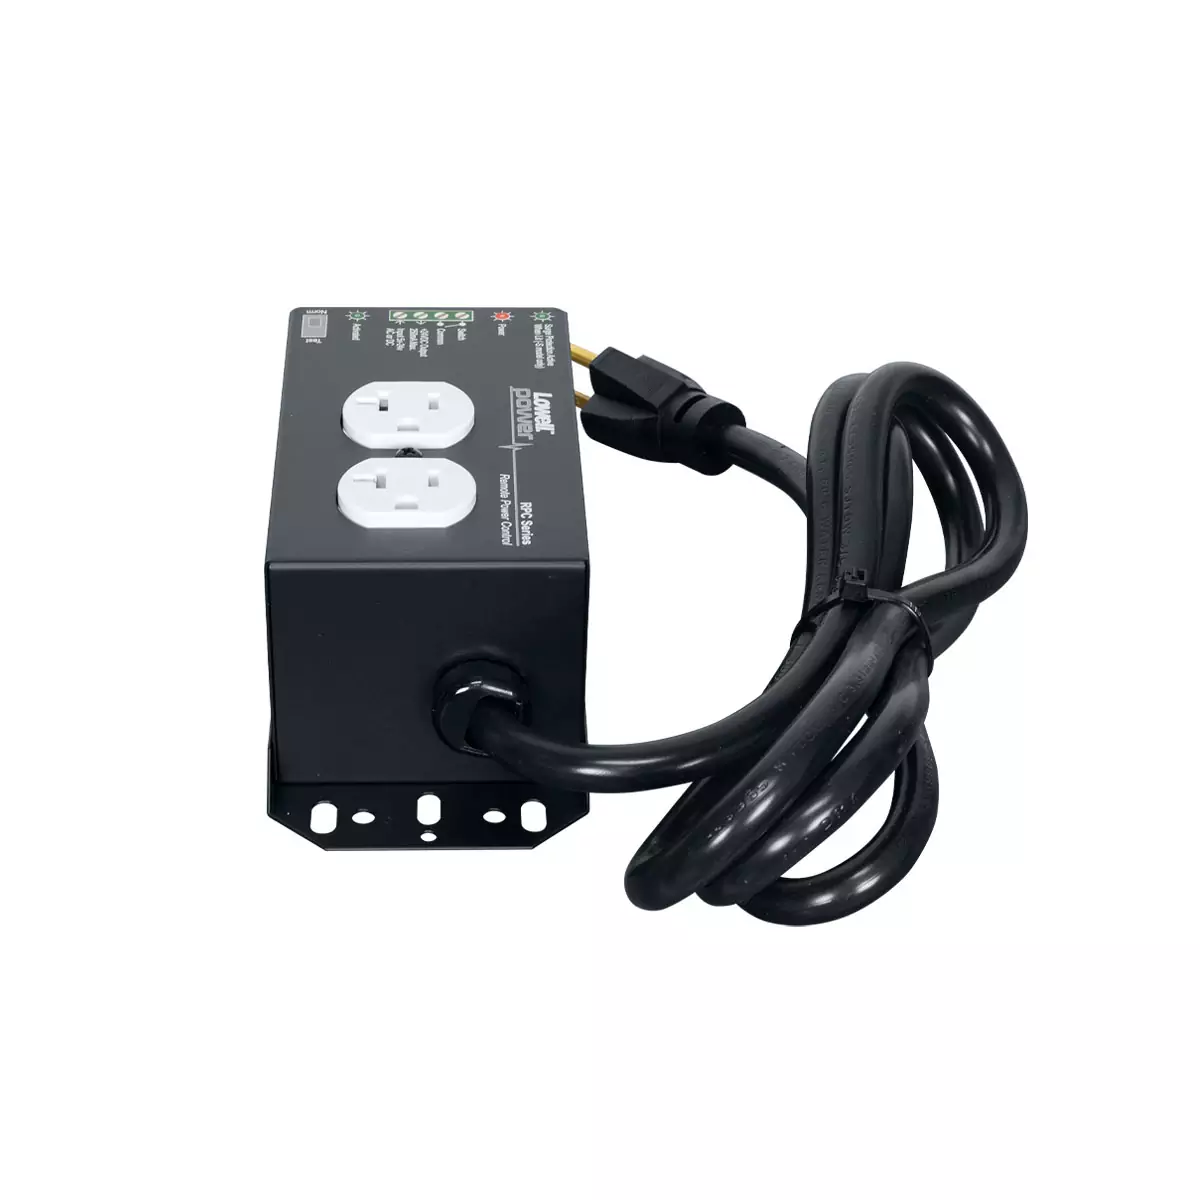 Lowell RPC-15 Remote Power Control